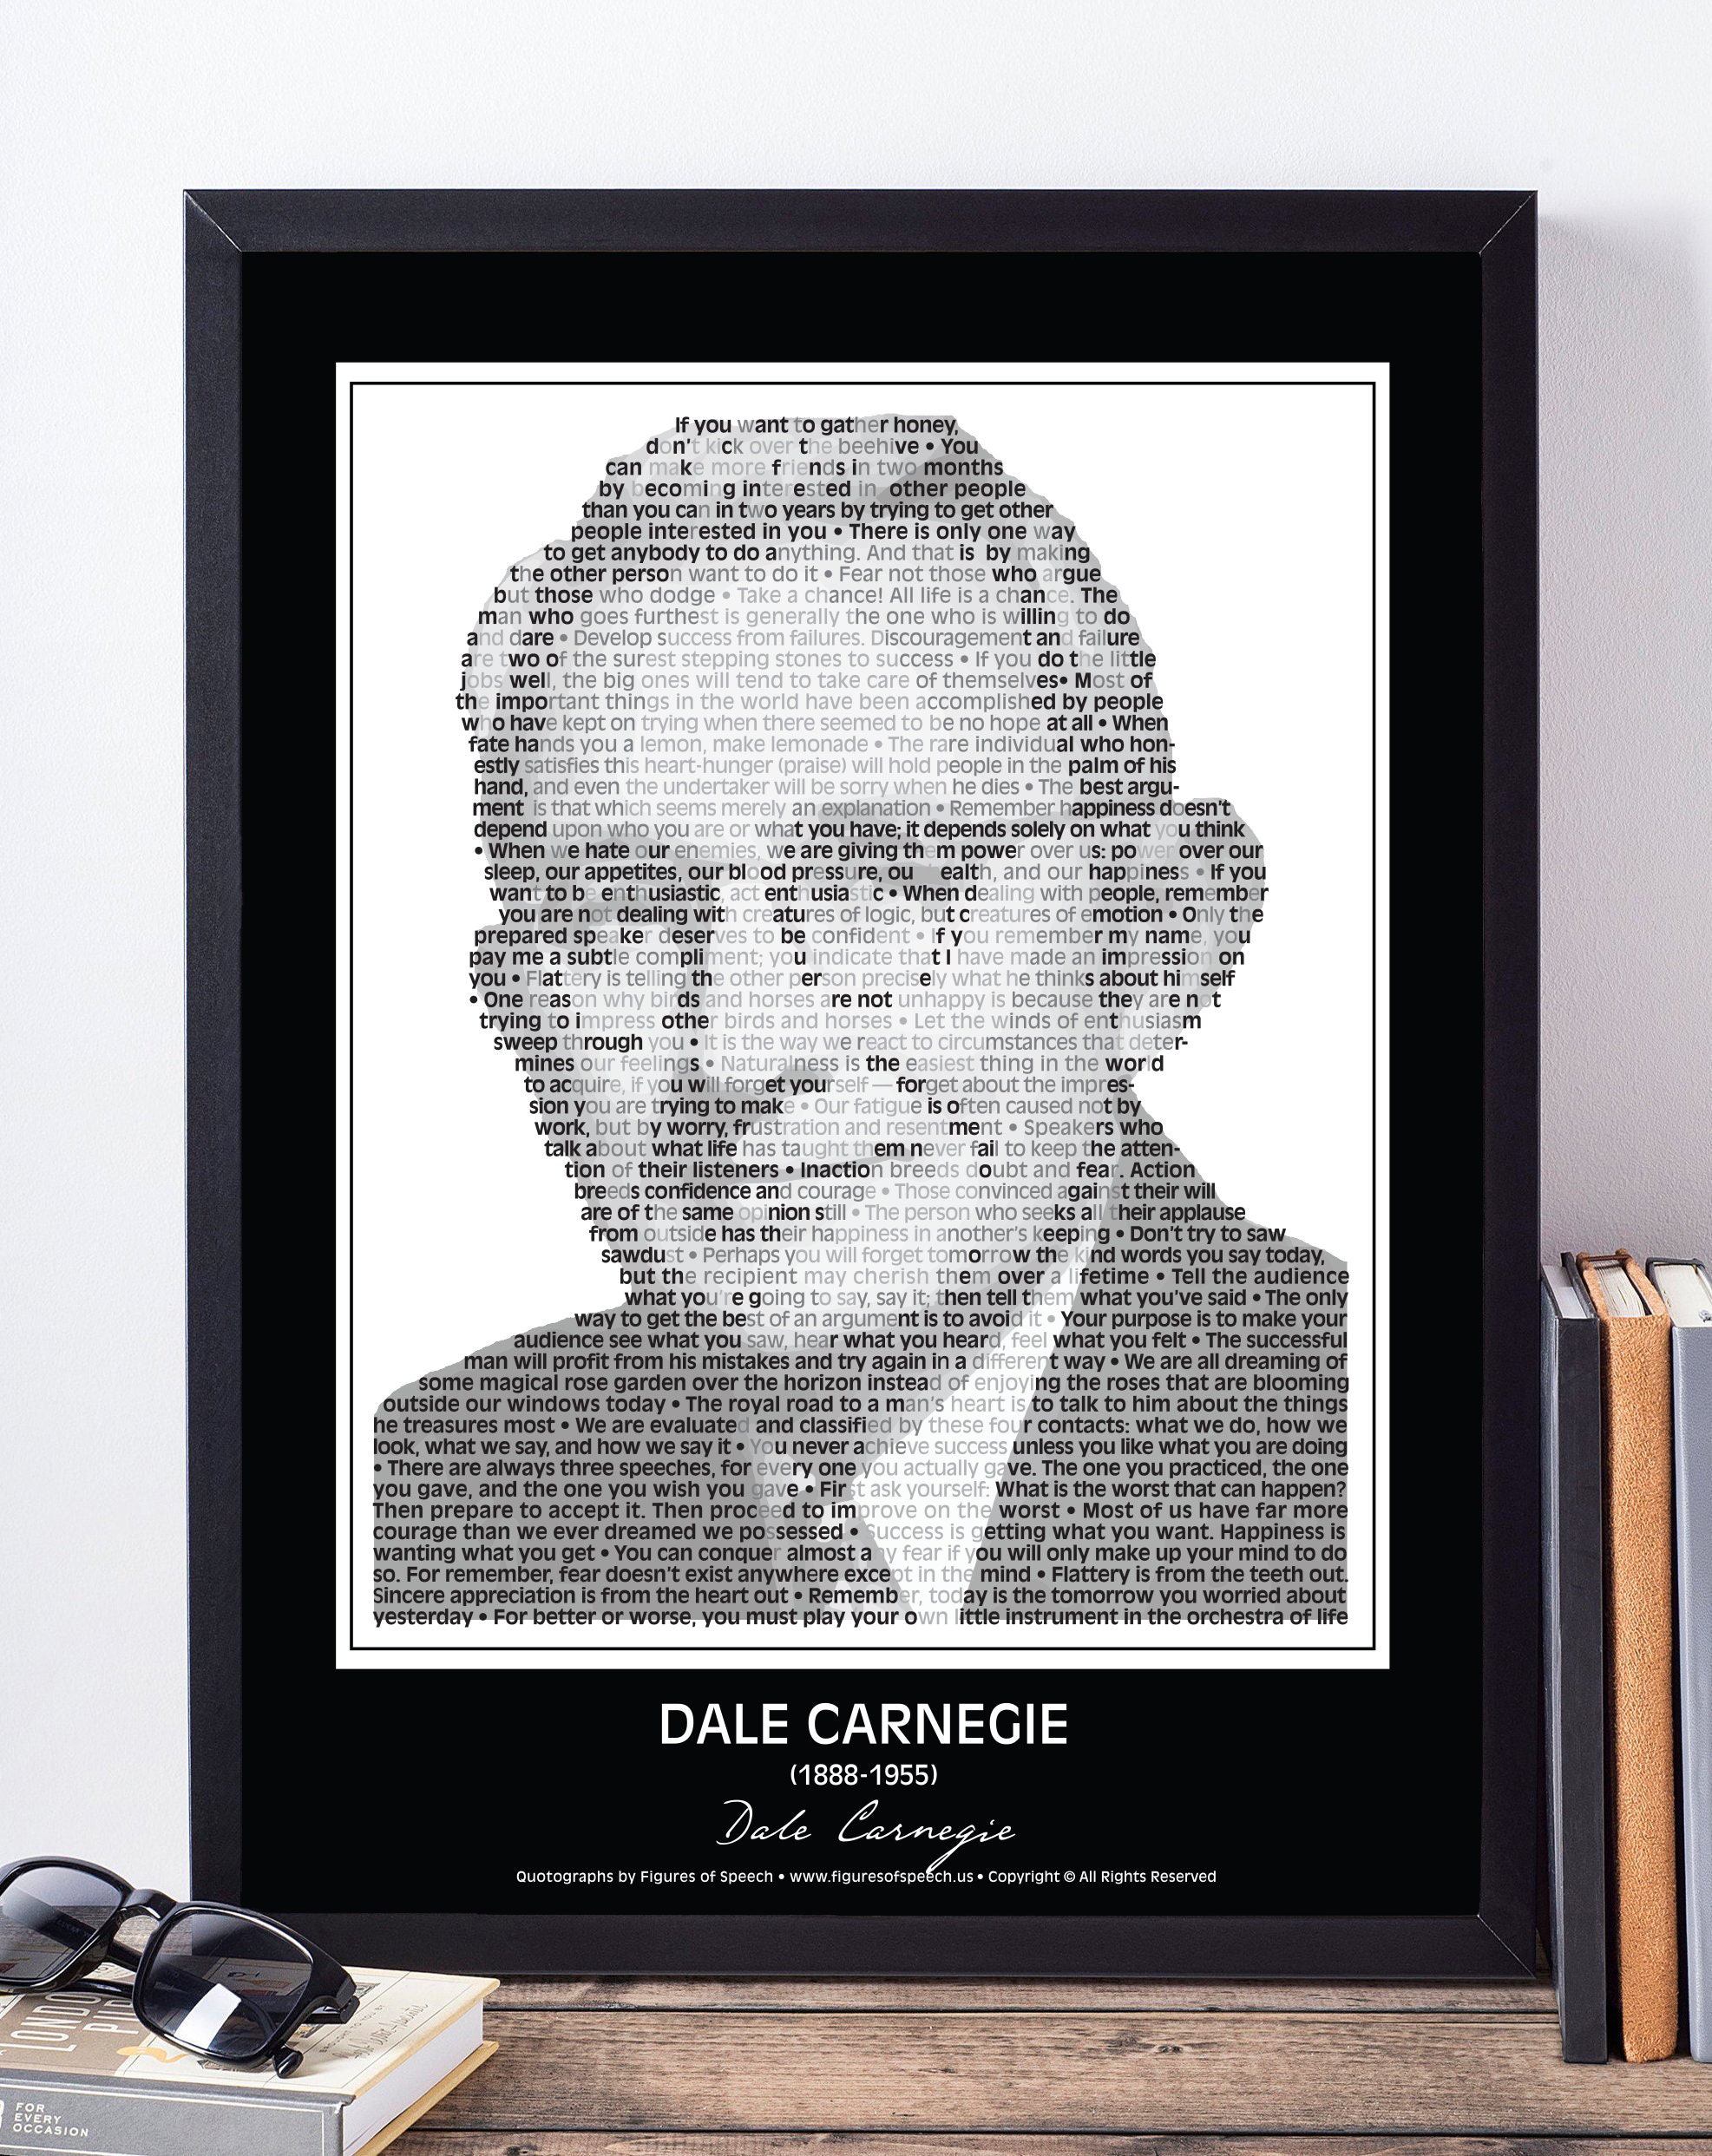 4 Inspiring Dale Carnegie Quotes You Can Learn From